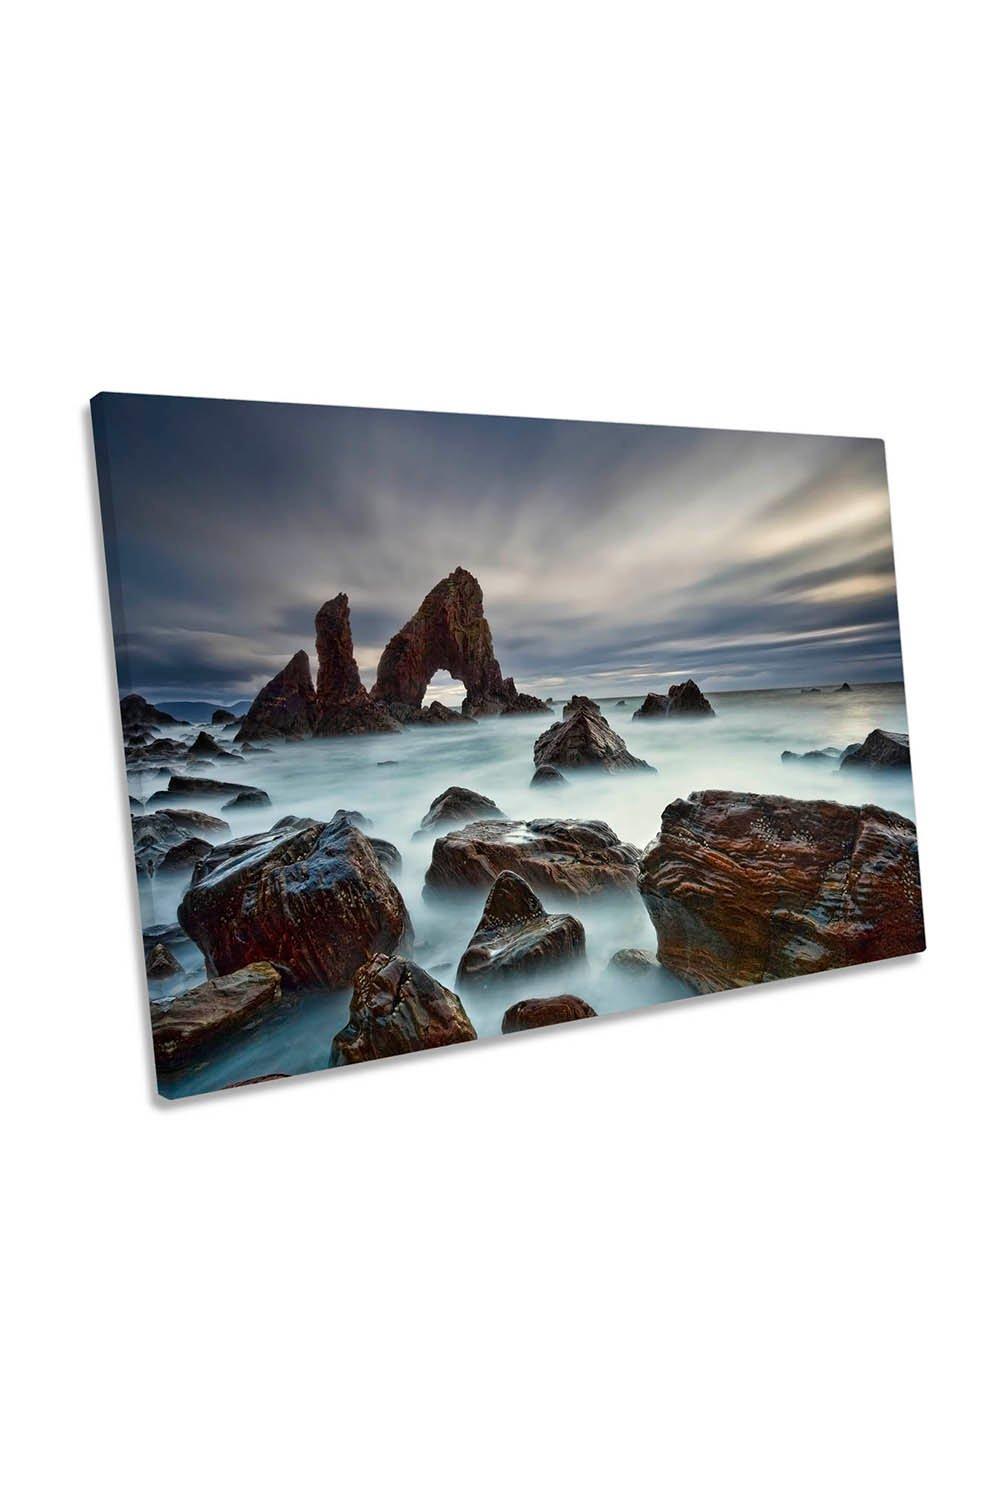 Sea Arch at Crohy Head Ireland Canvas Wall Art Picture Print